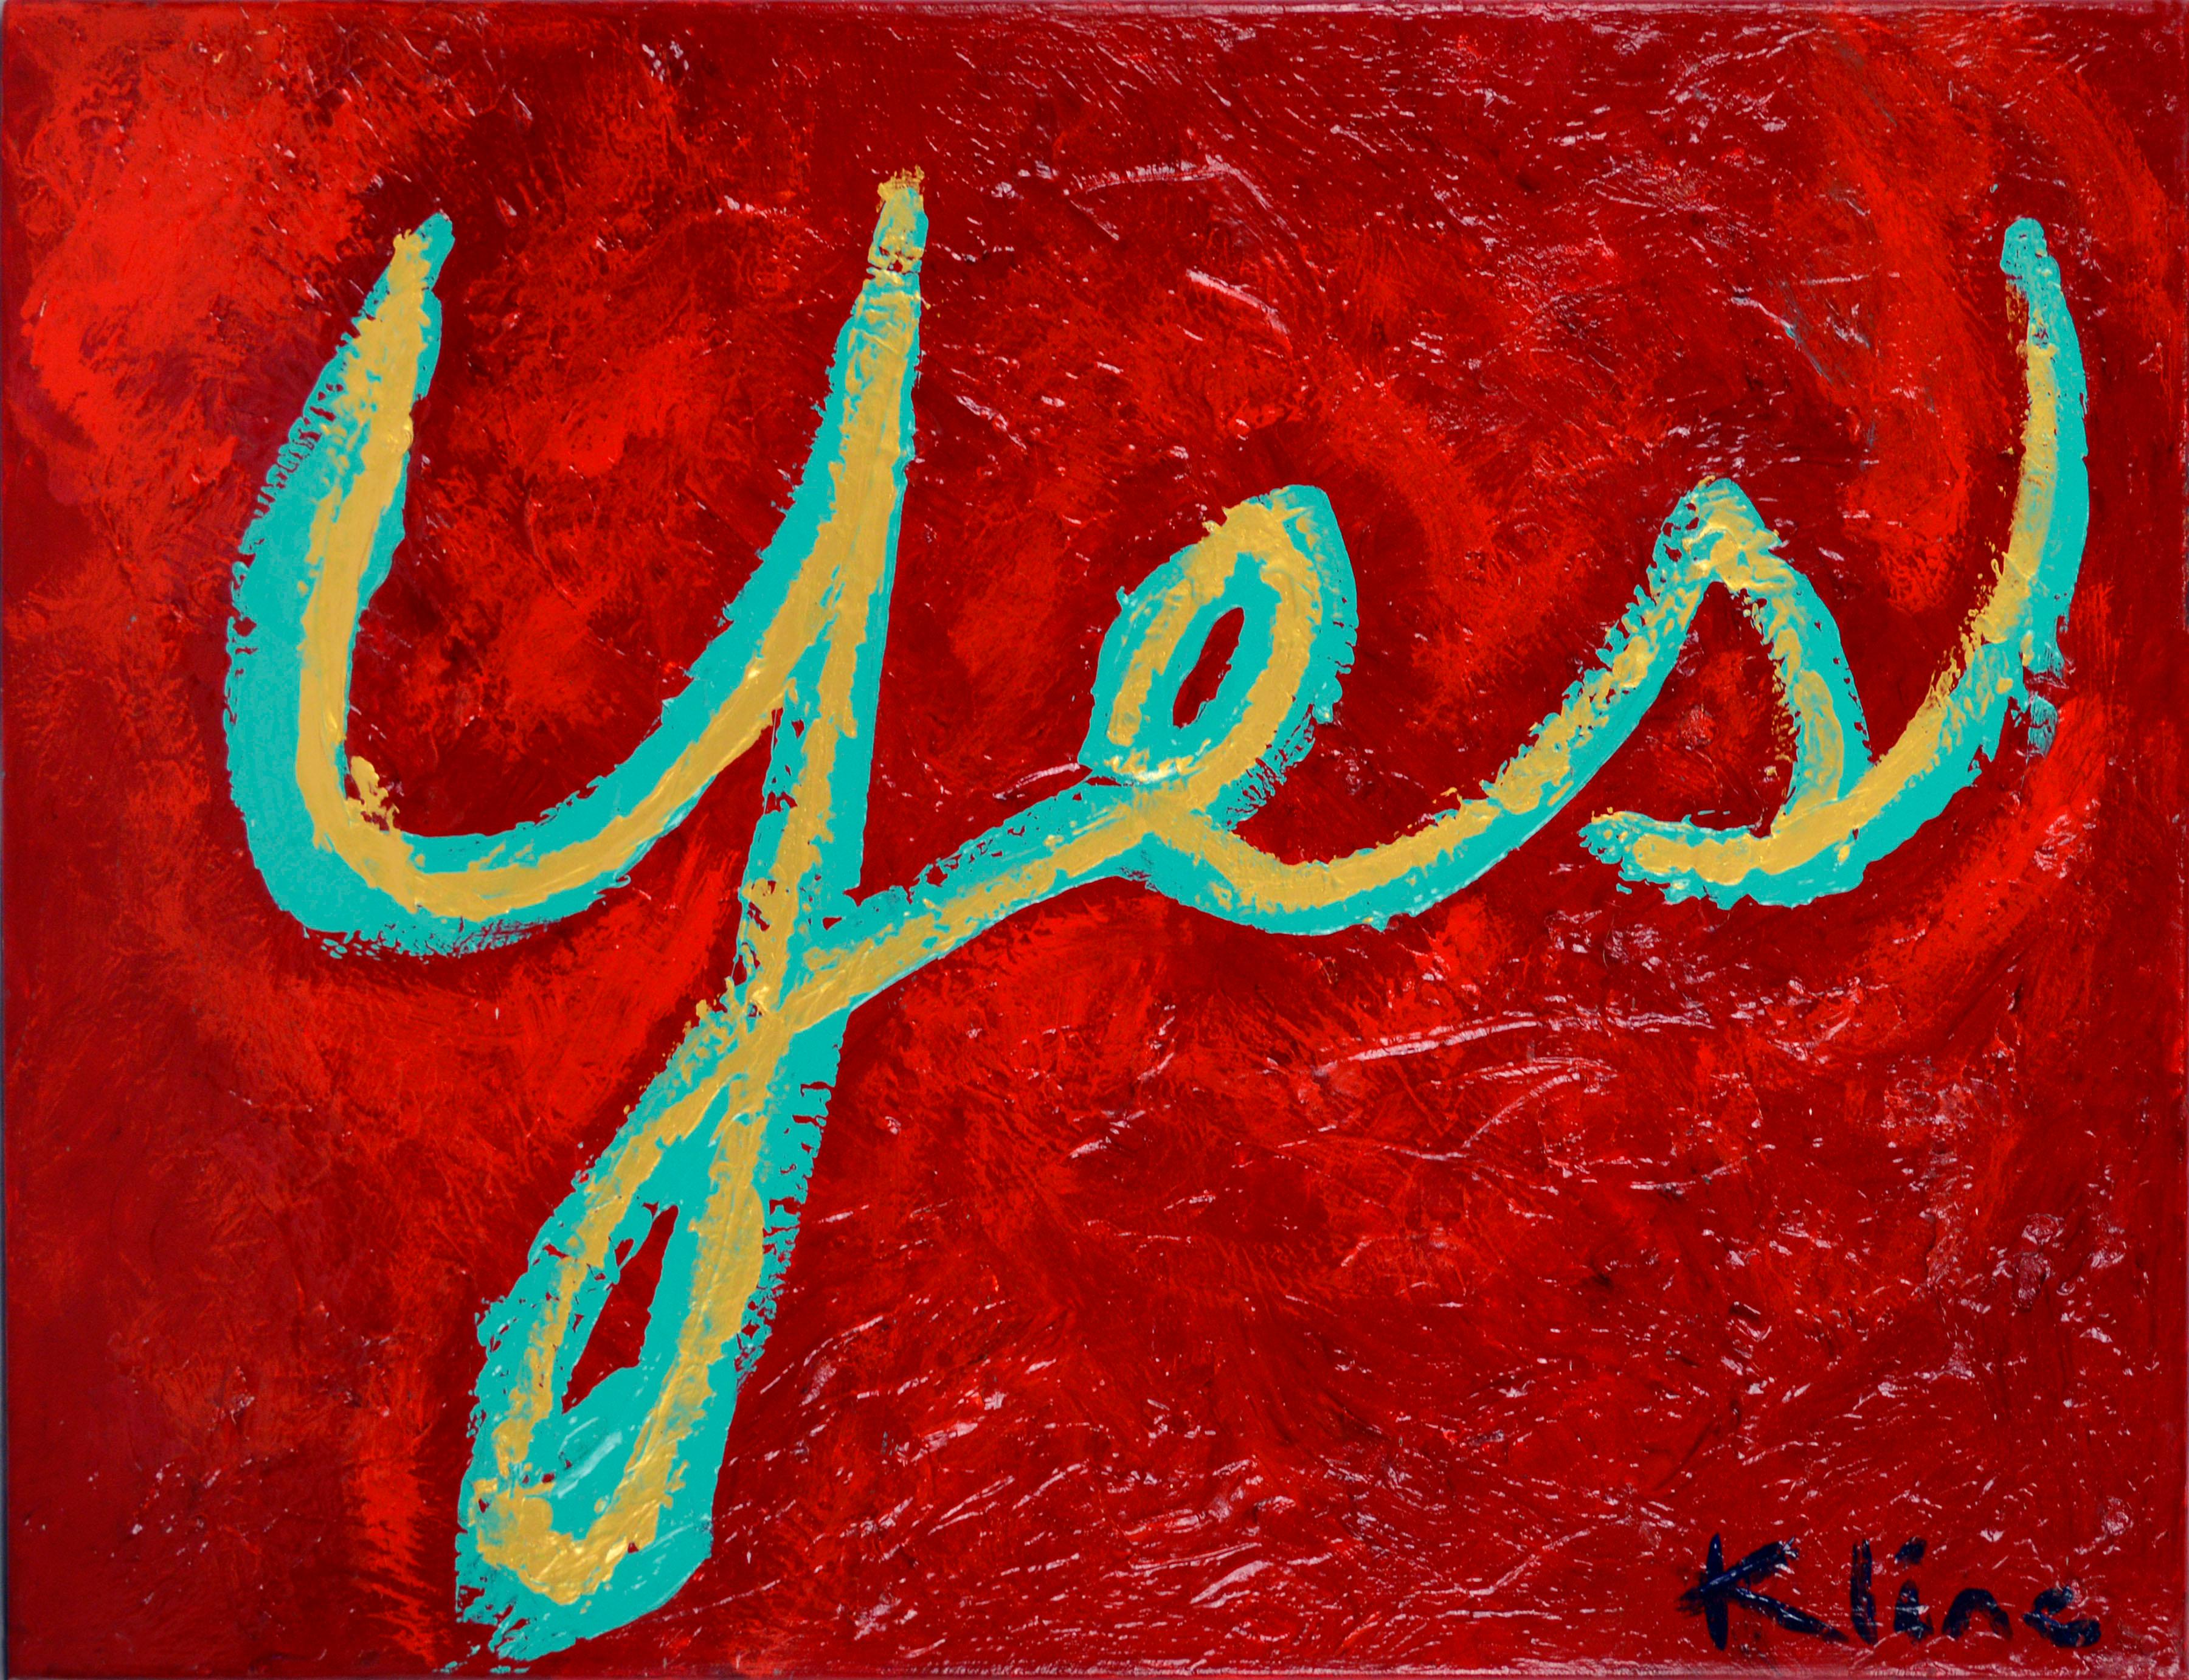 Howard Kline  Abstract Painting - "Yes" - Pop Art in Red 